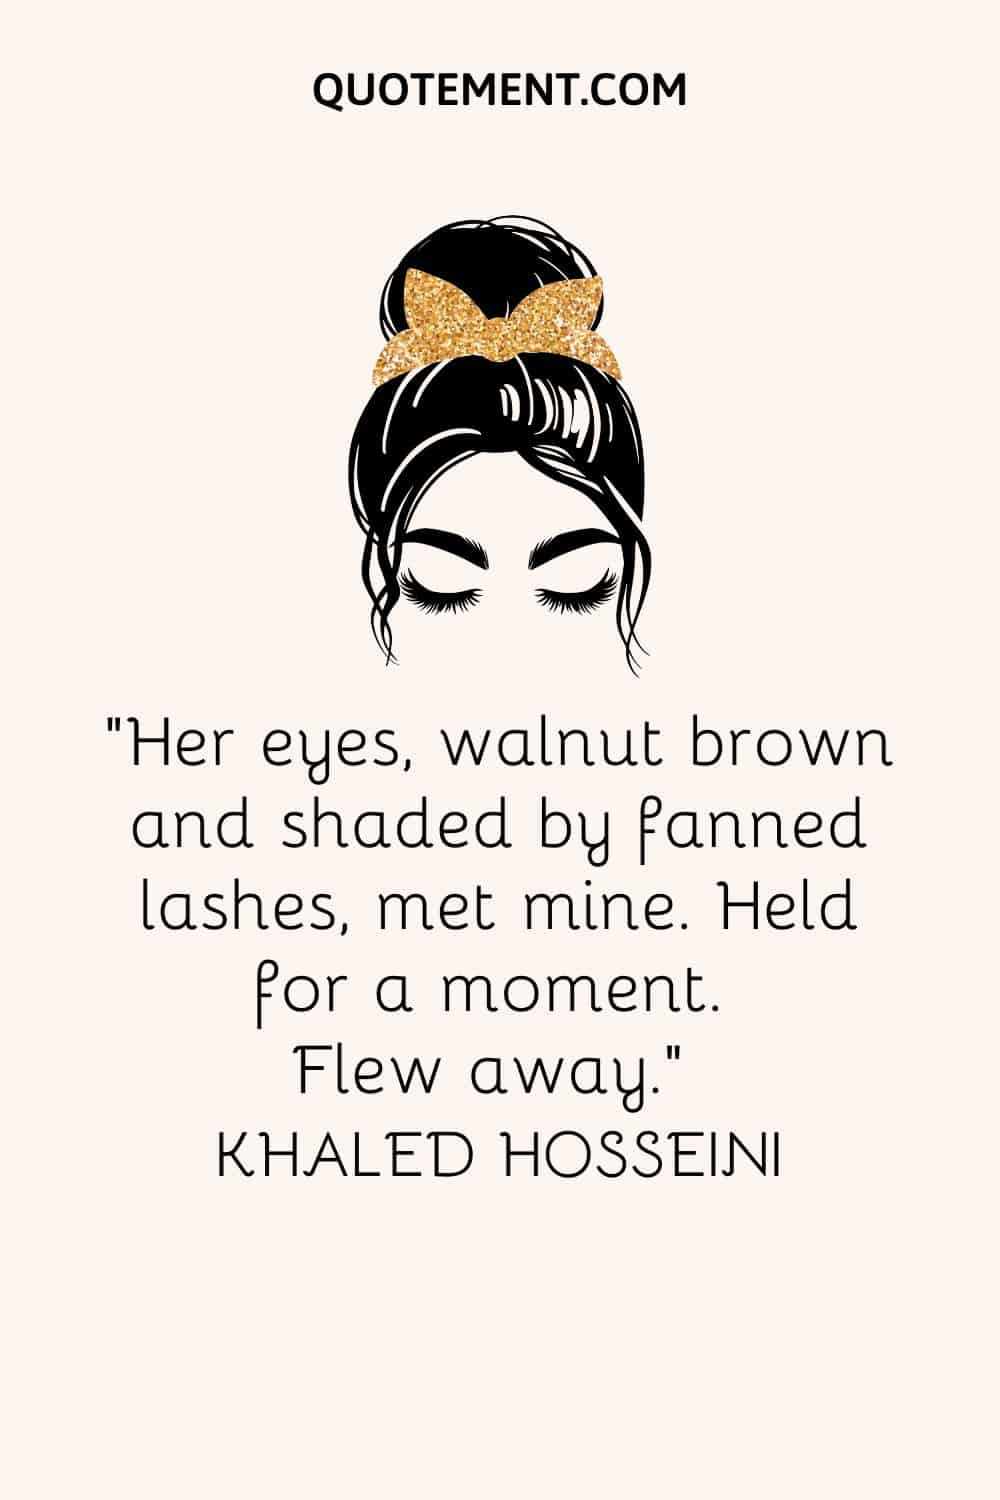 Her eyes, walnut brown and shaded by fanned lashes, met mine